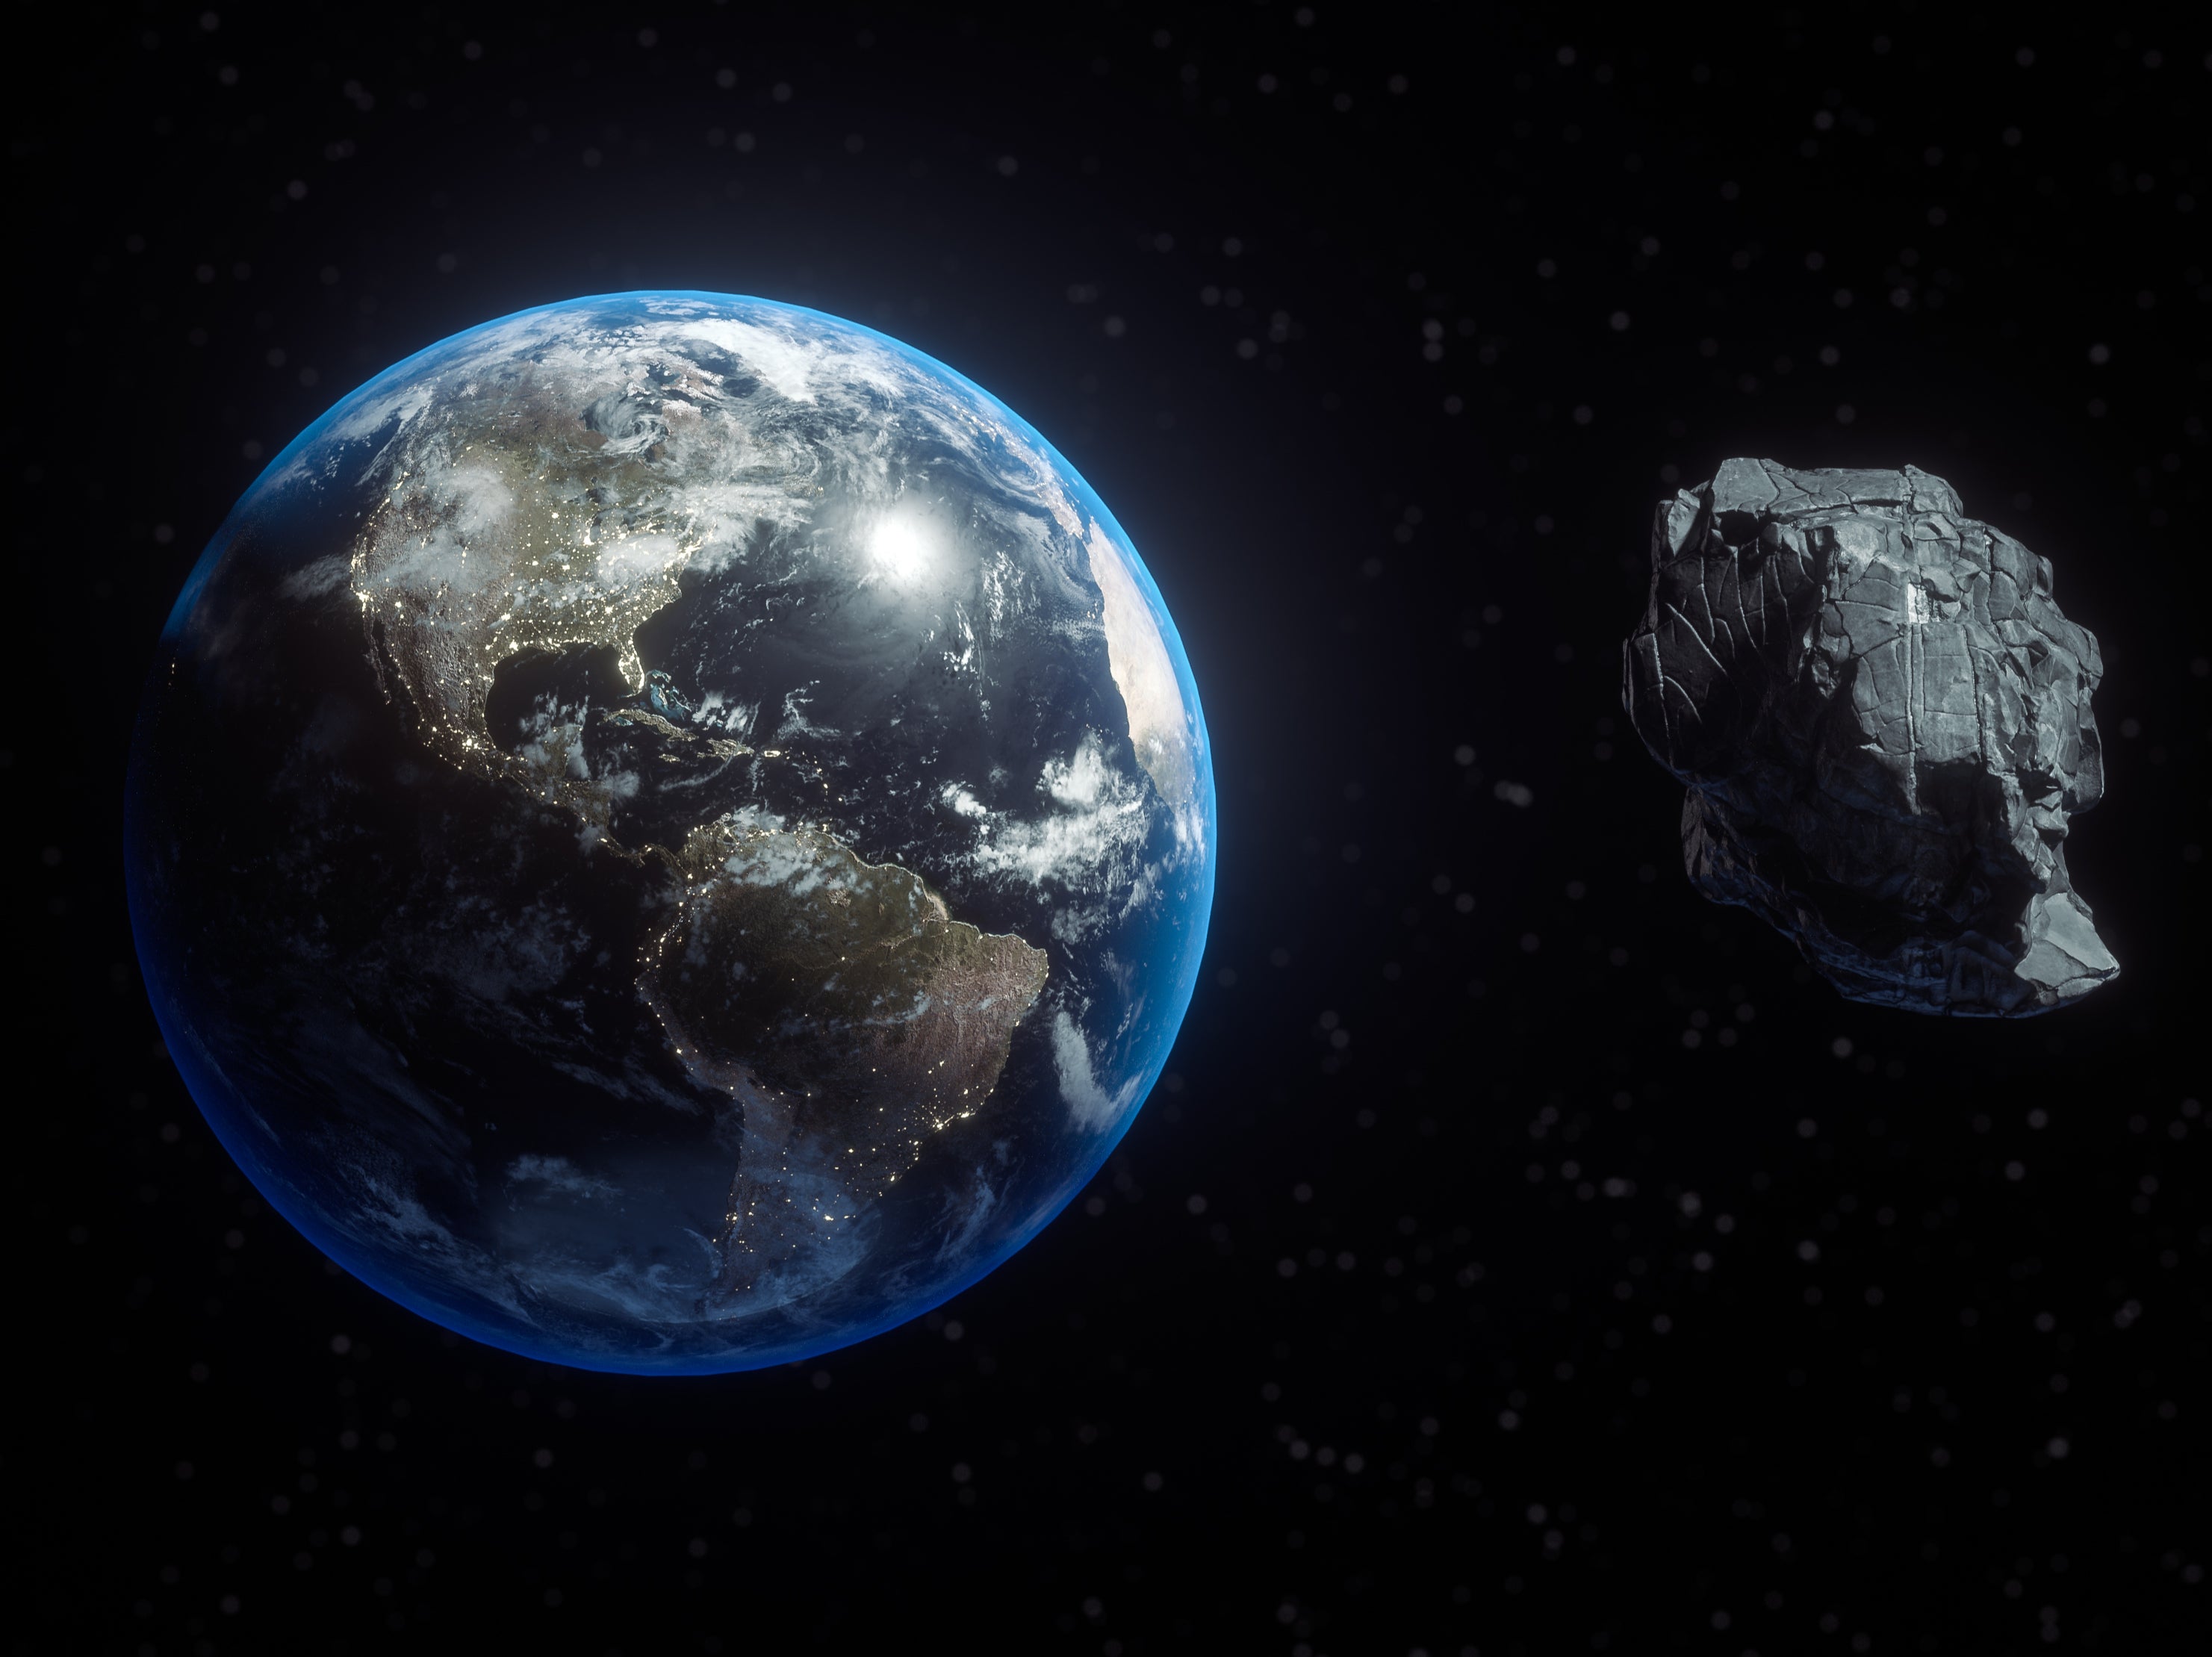 The space agency is testing technology that could divert dangerous asteroids